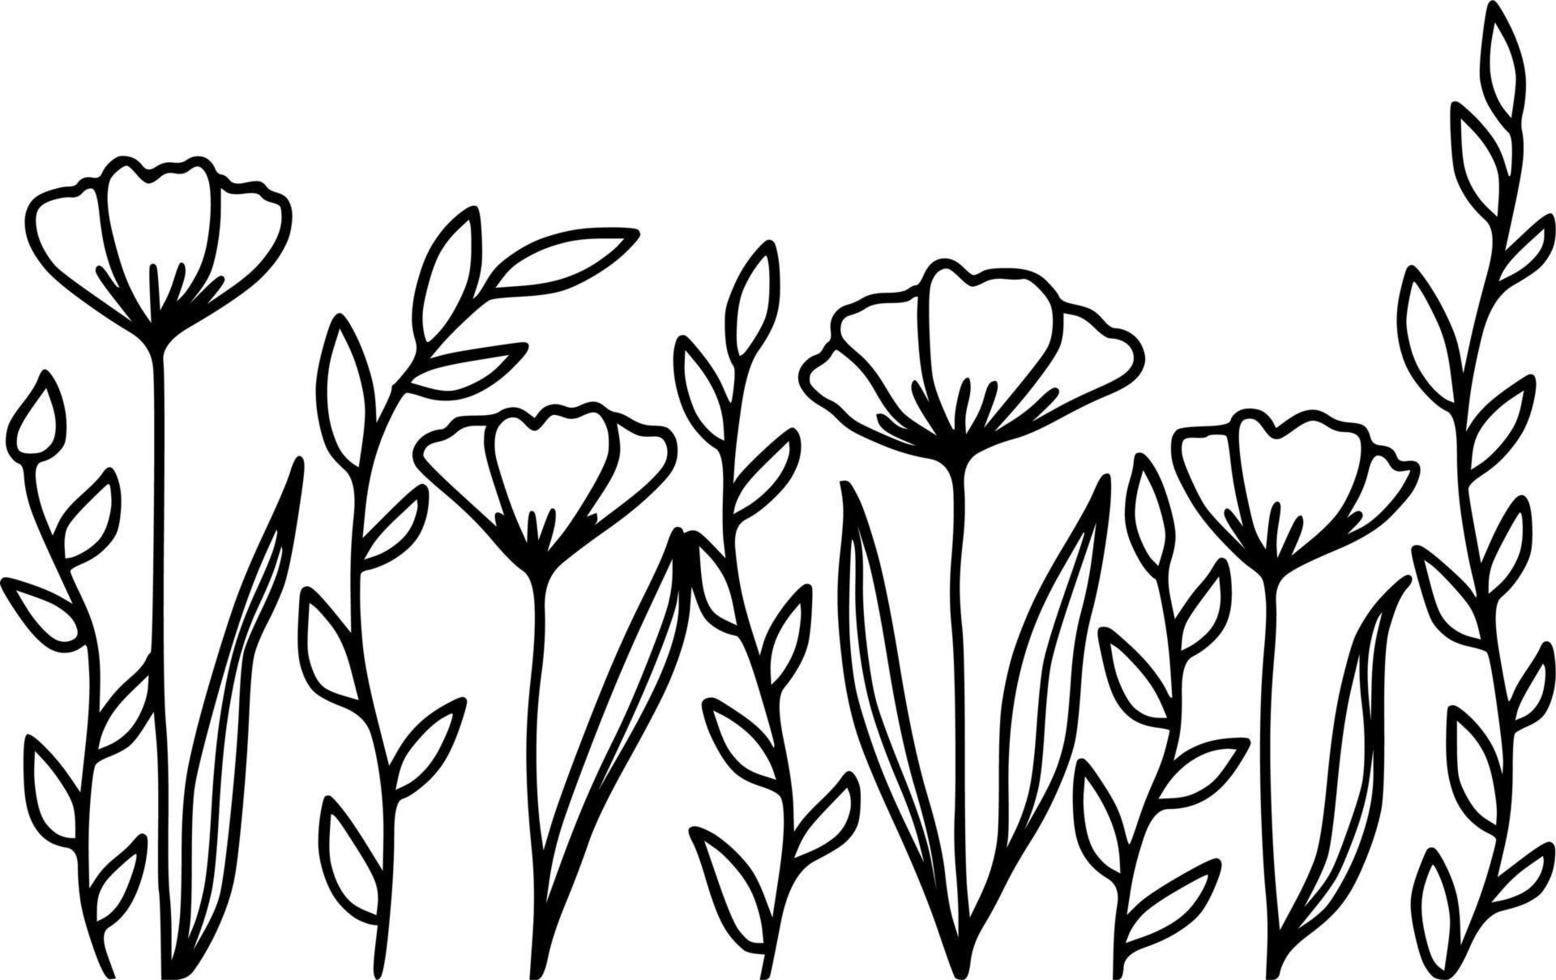 Doodle flower drawing vector